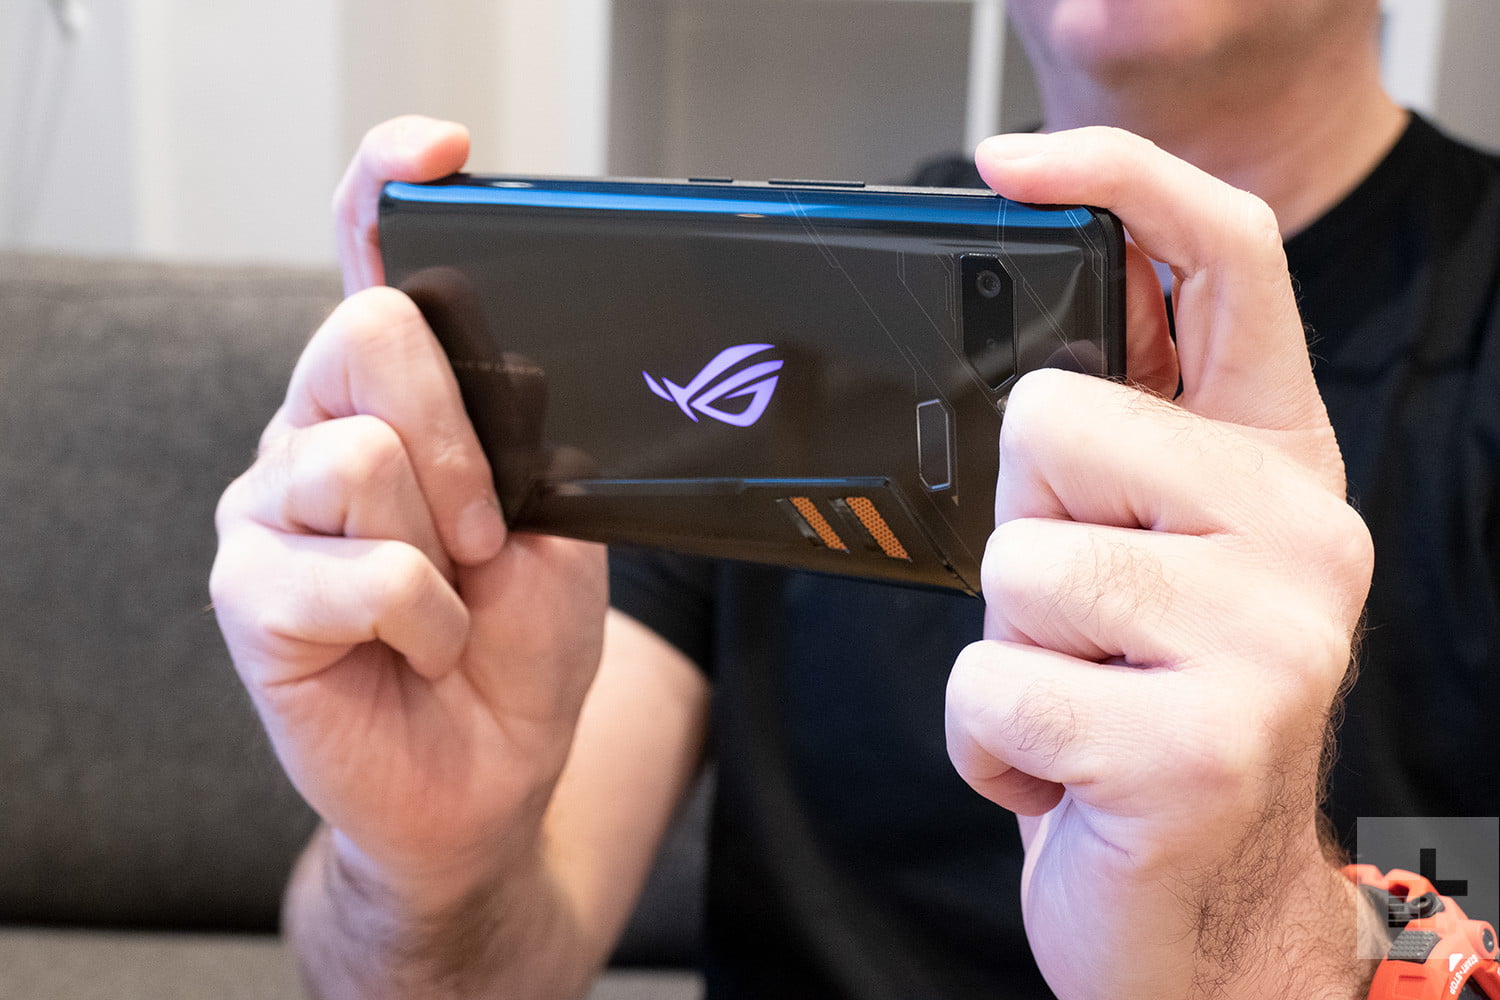 Asus announces July 23 for Asus ROG 2 launch date